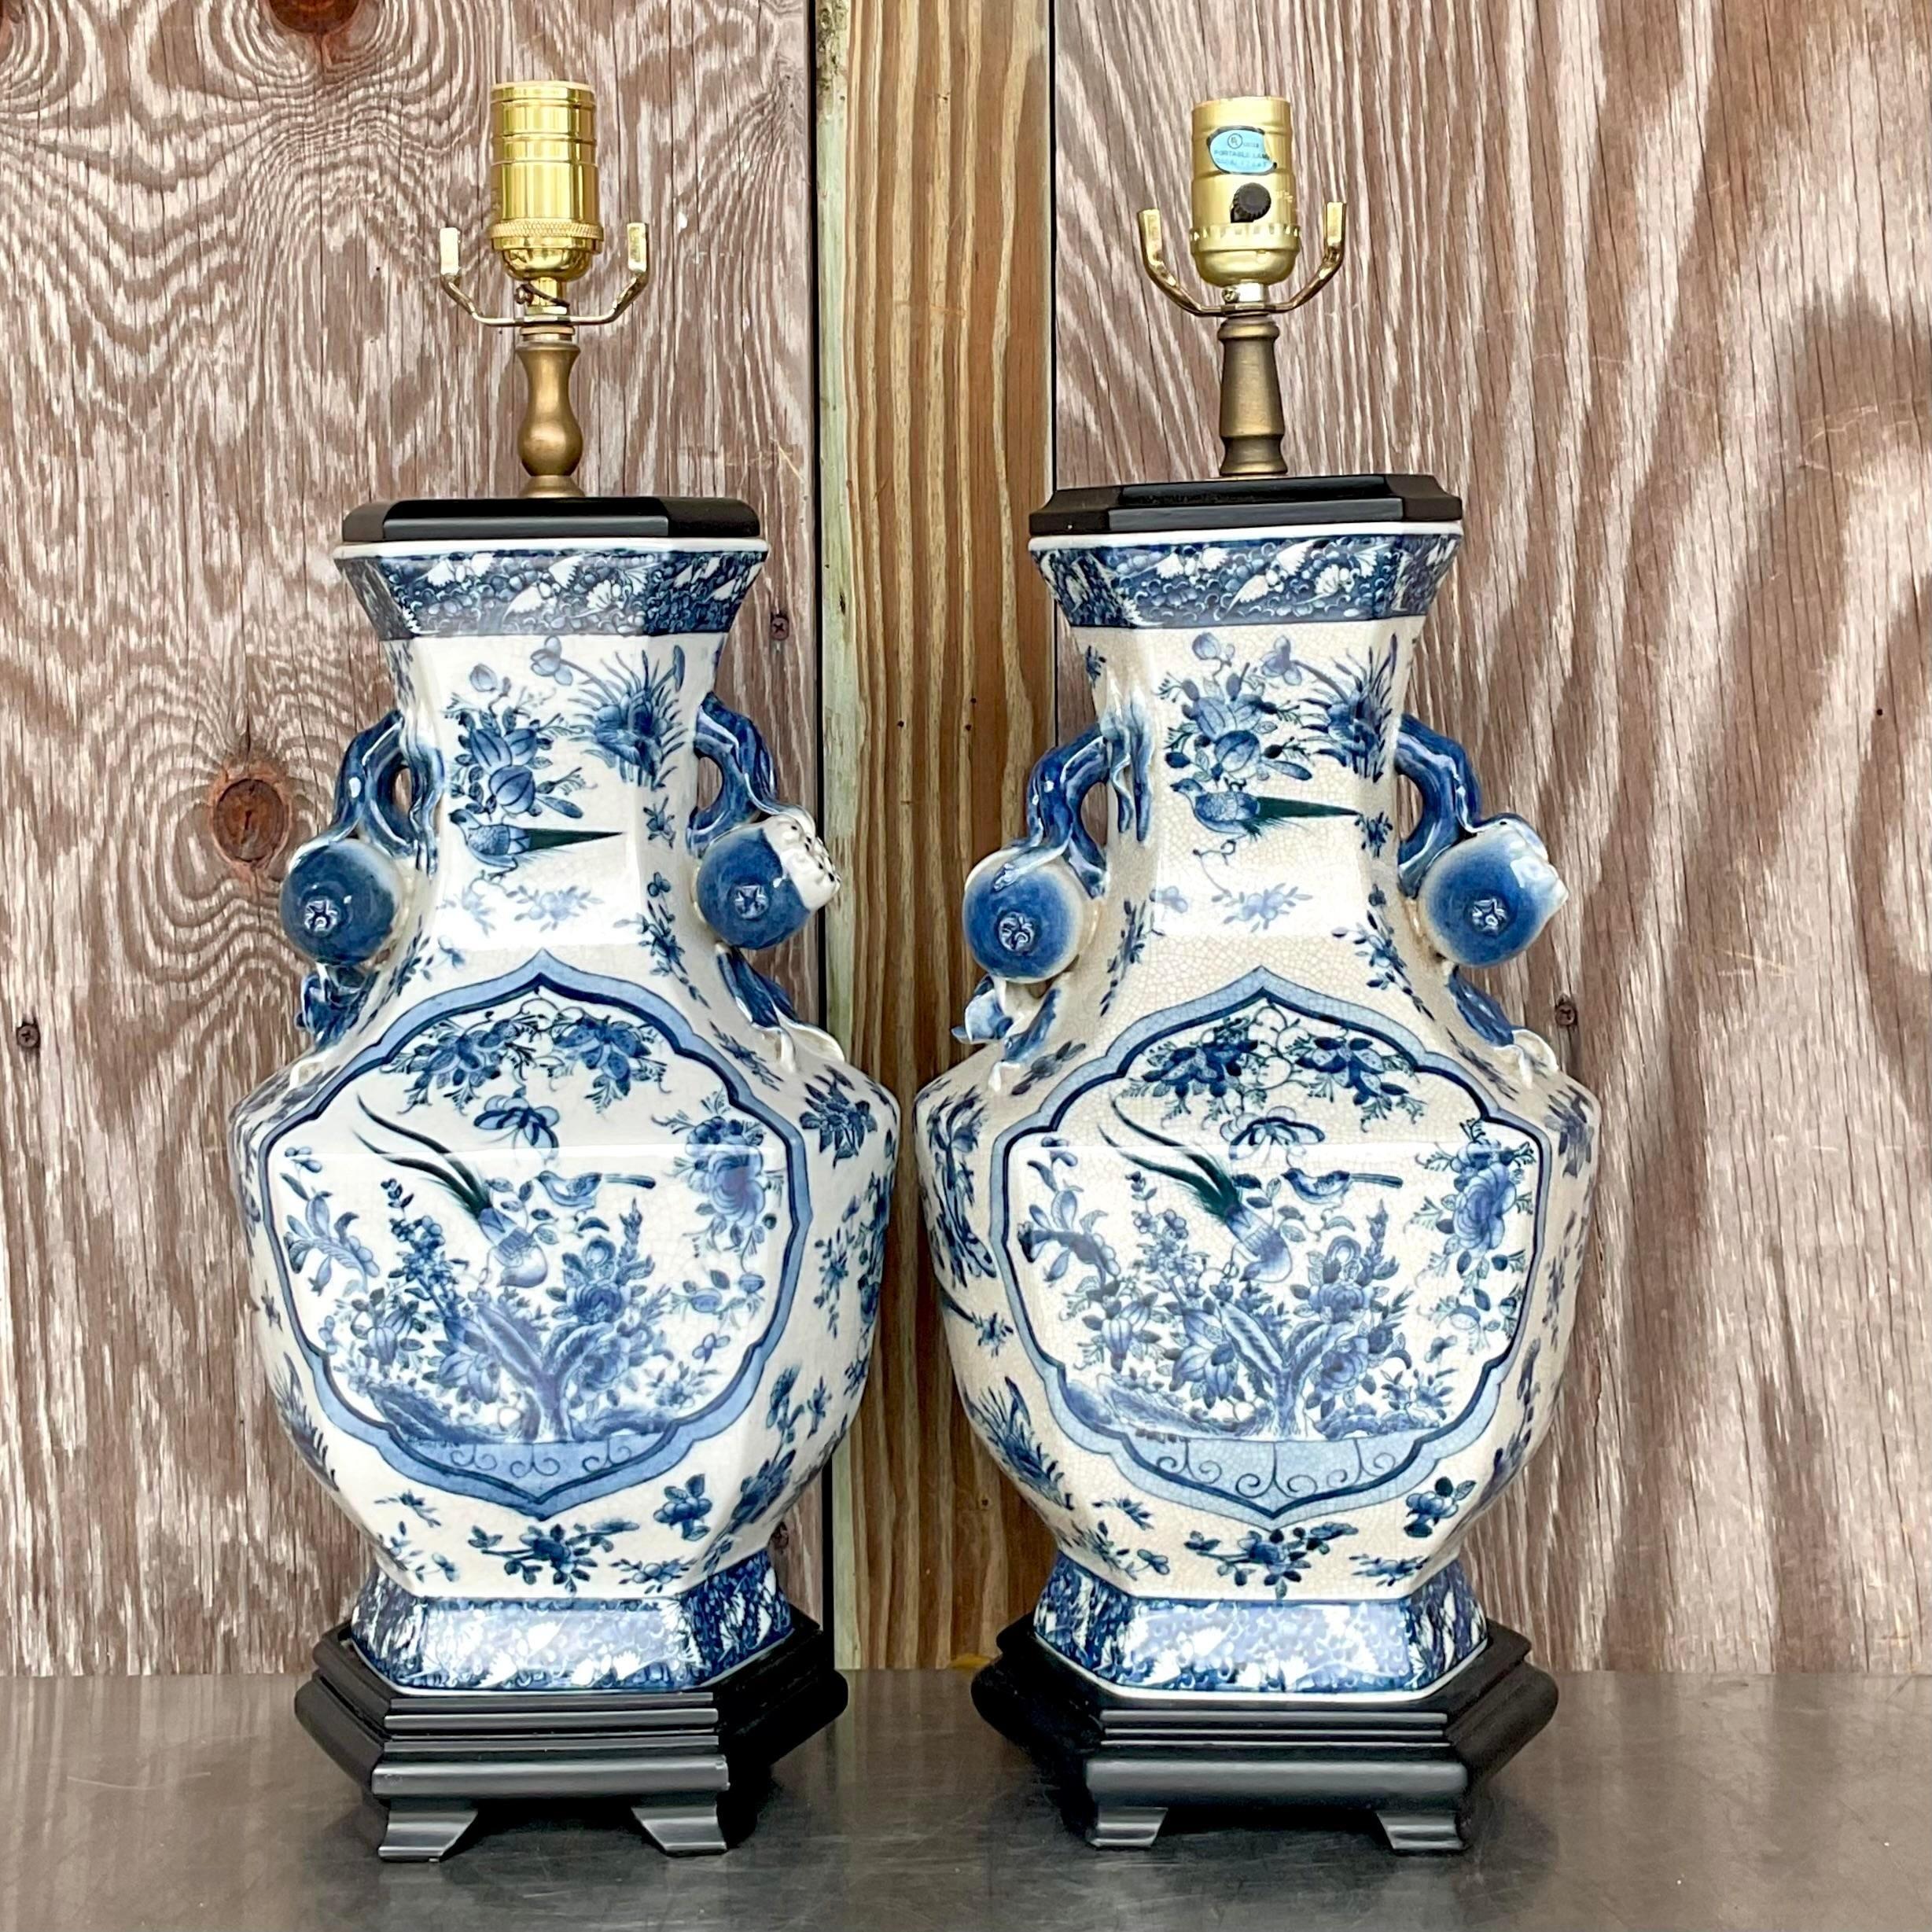 Vintage Asian Chinoiserie Ceramic Lamps - a Pair For Sale 3